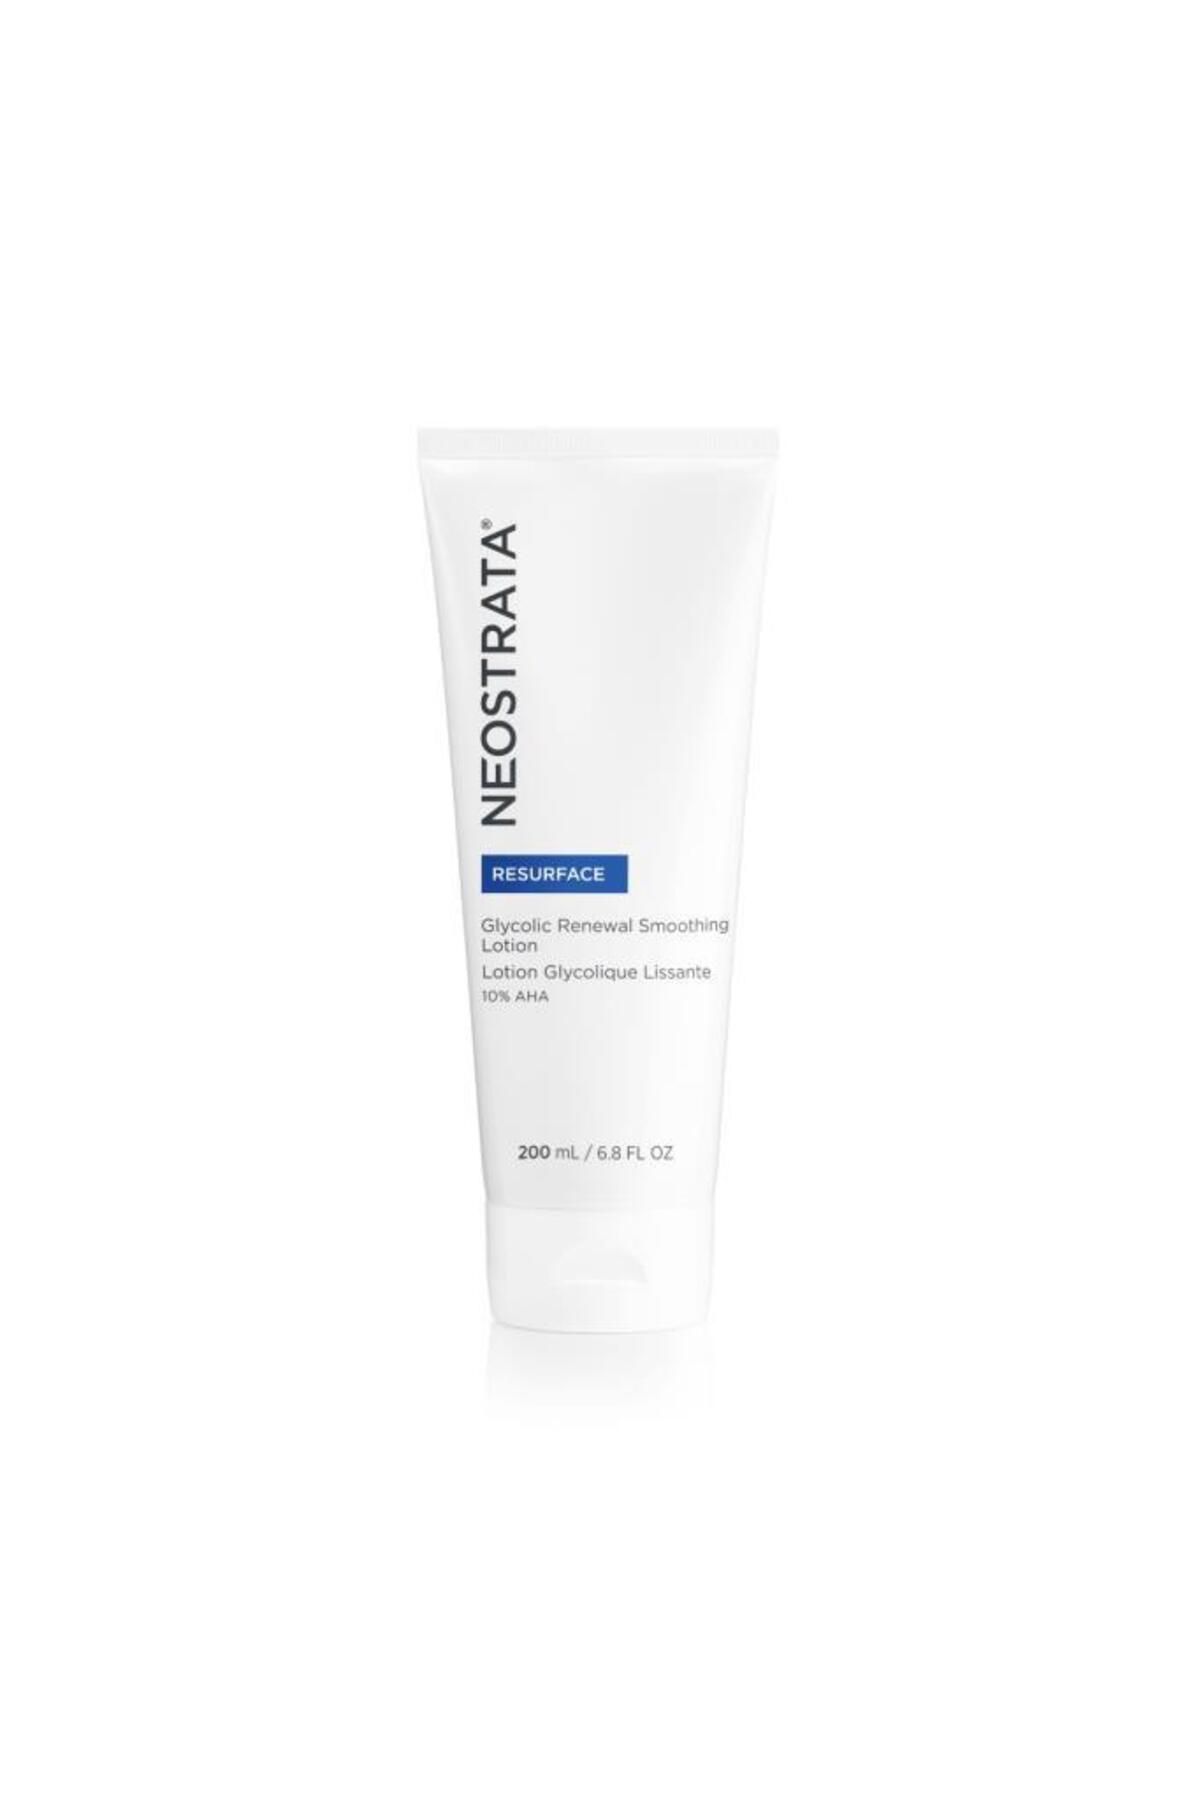 NeoStrata Resurface Wrinkle and Fine Line Reducing, Renewing & Smoothing Glycolic Lotion 200 ml PSSNS559